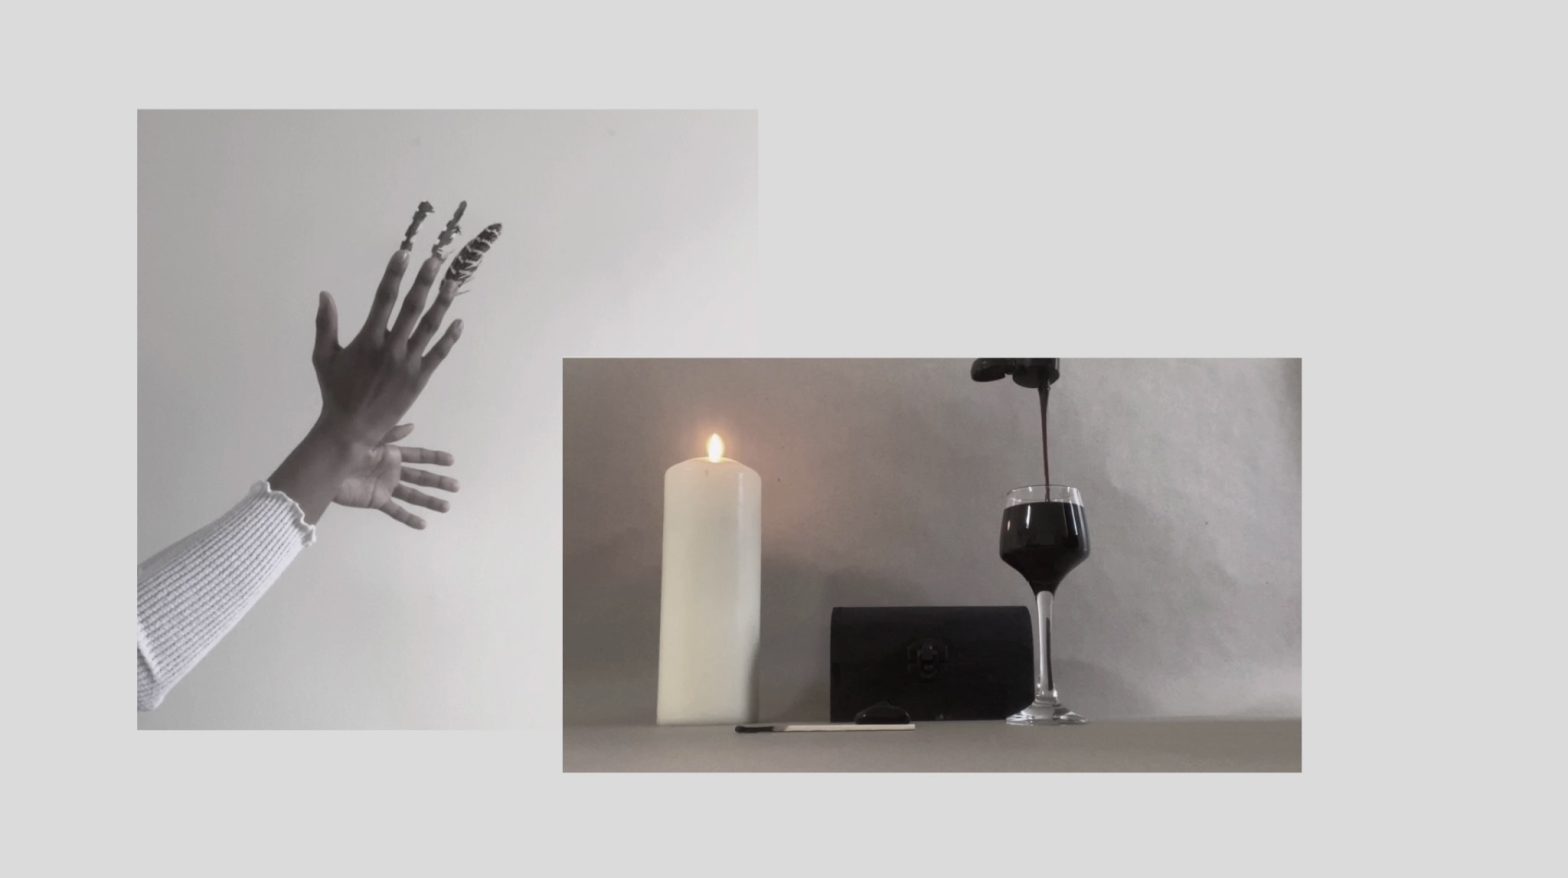 Two photographs on a white background. One shows a pair of hands with feathers attached to several fingers like long nails. The second shows a lit candle, a long match, and a wine glass filled with a dark liquid being poured vertically from above.